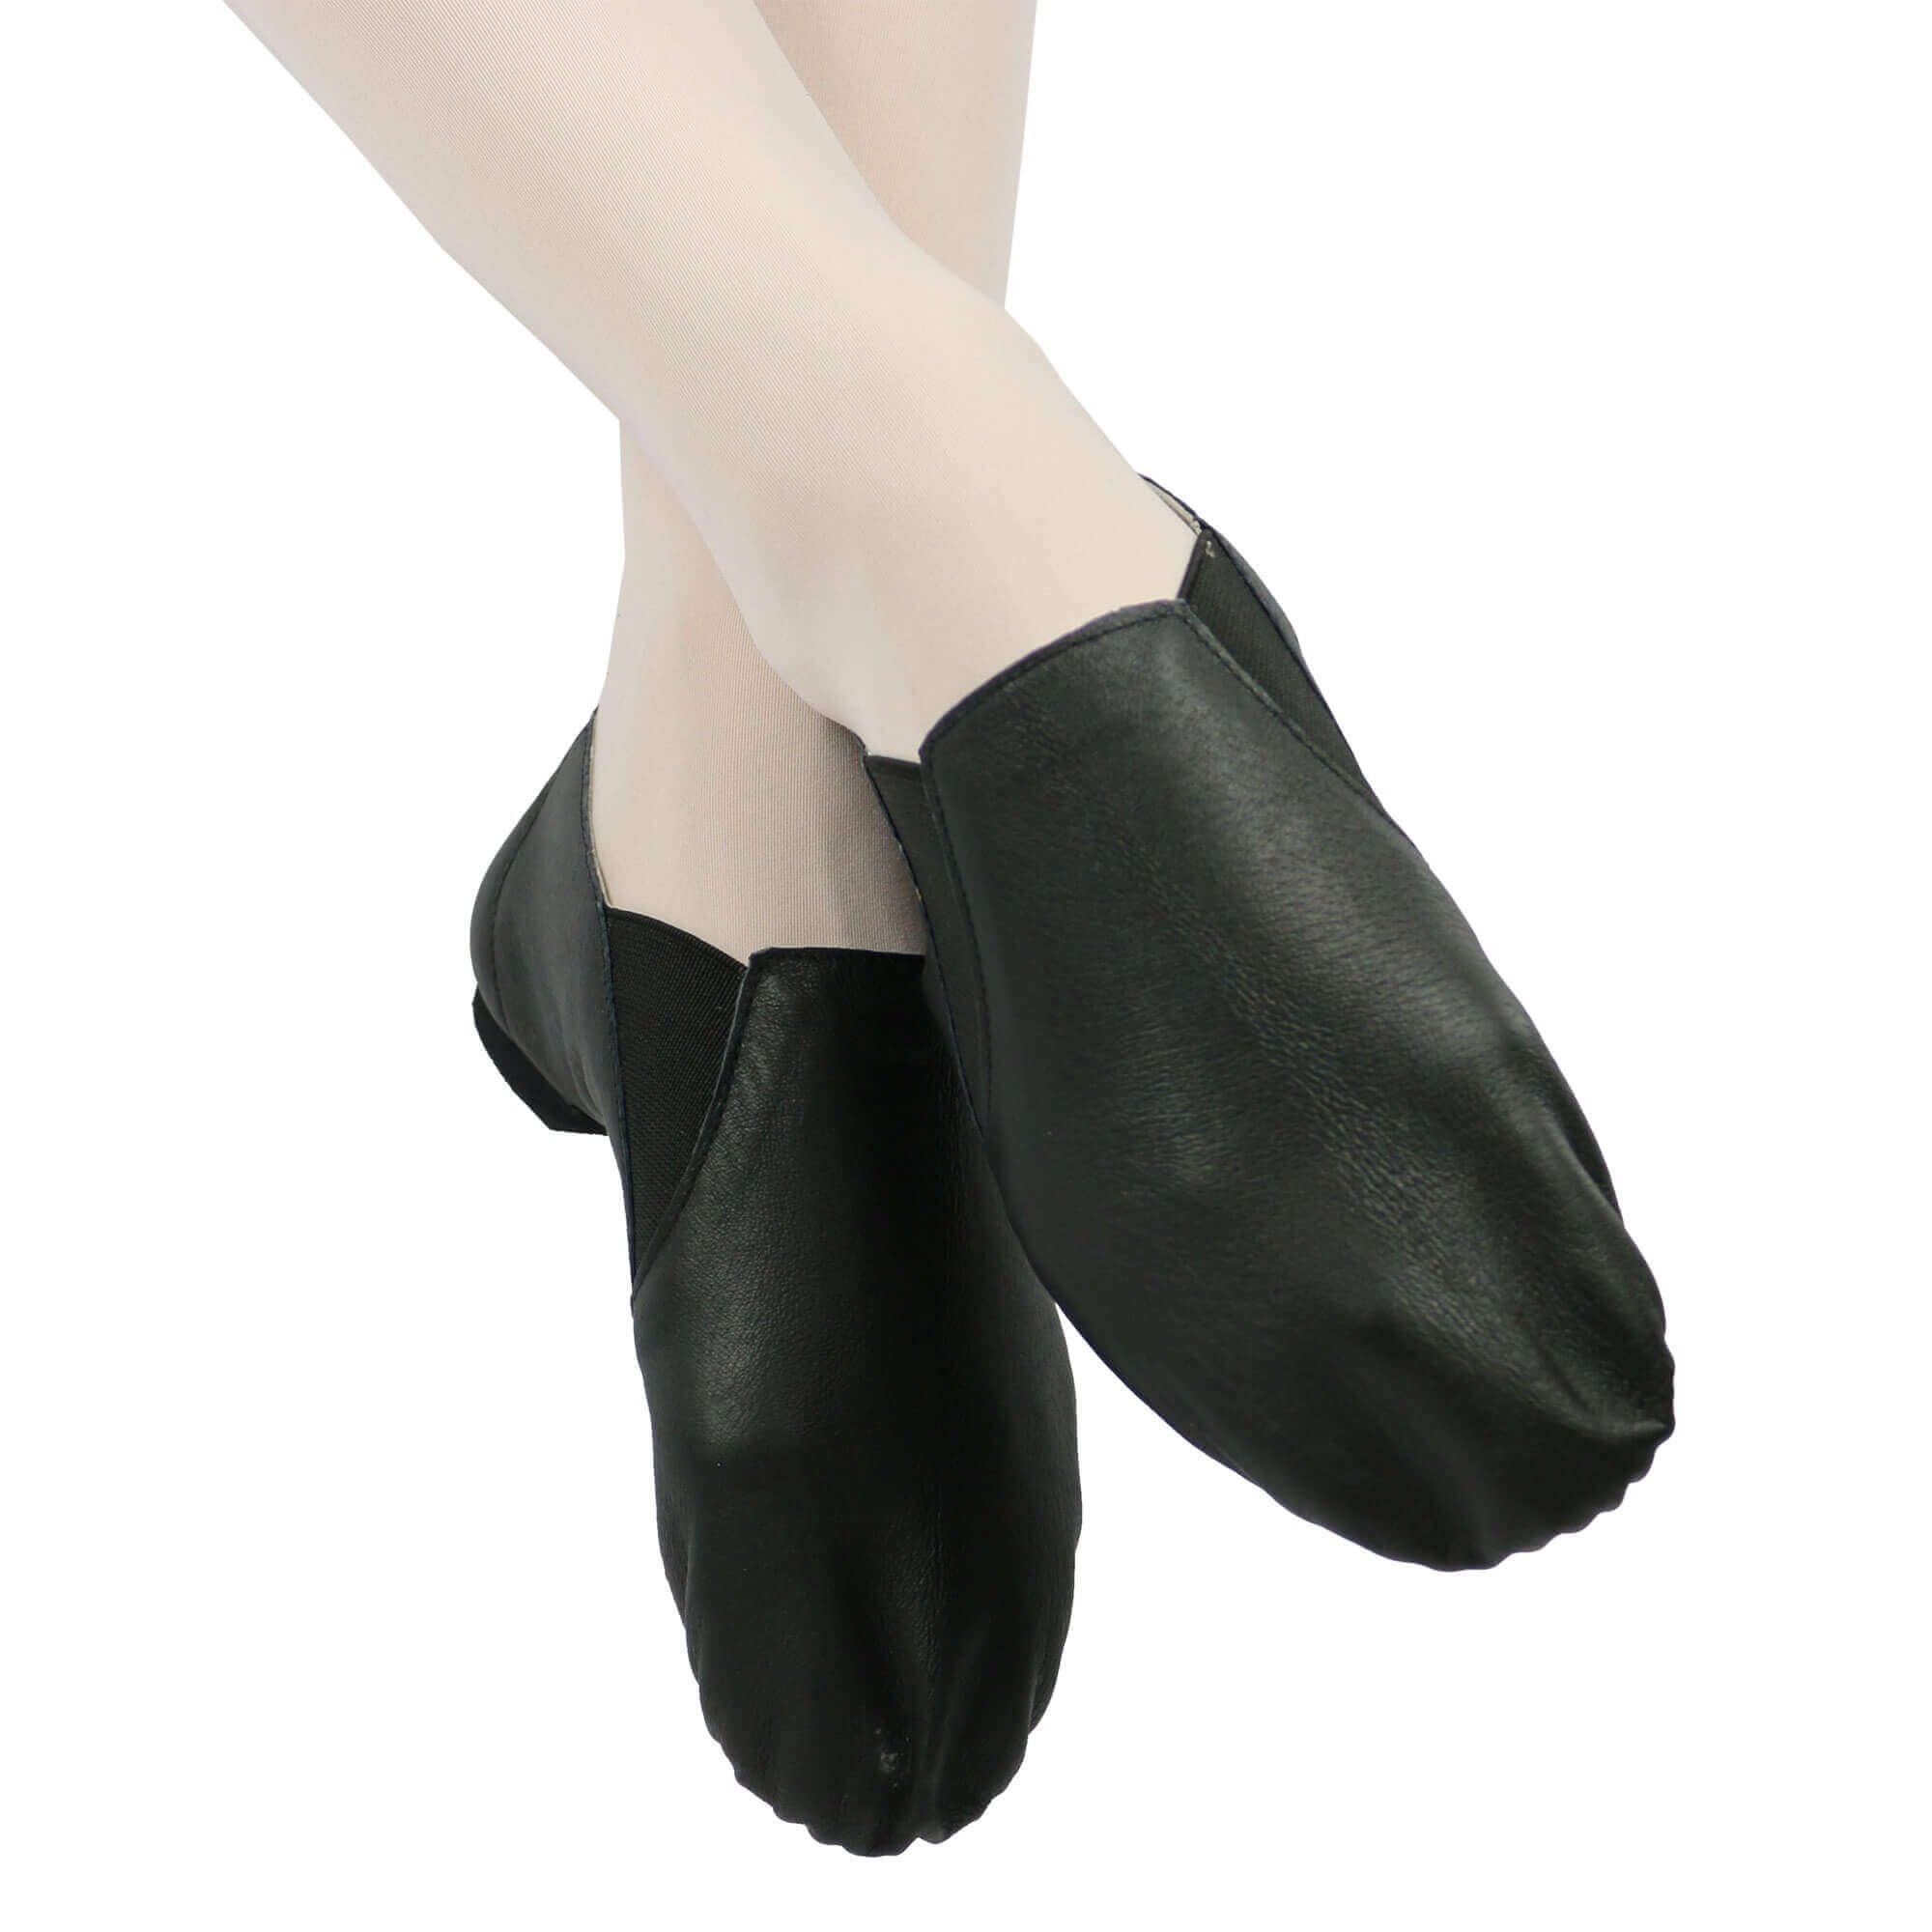 Danzcue Adult Dance Leather Jazz Bootie - Click Image to Close